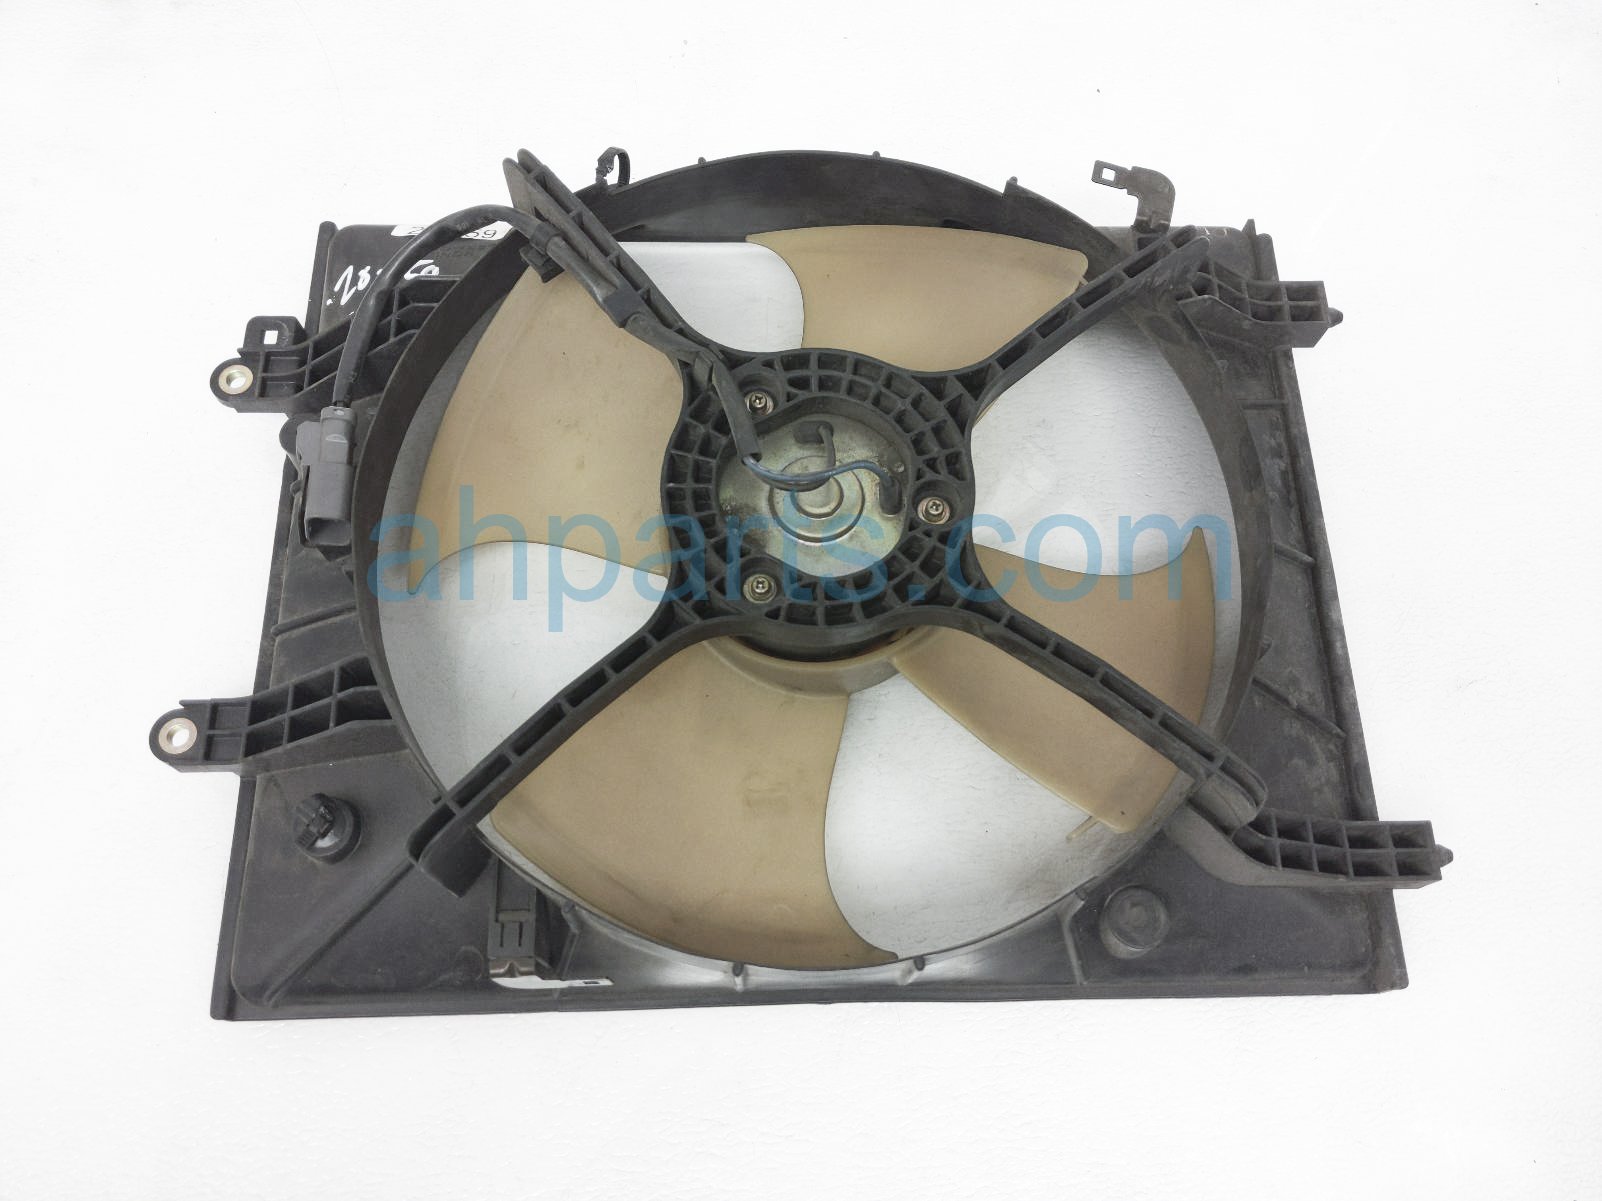 $40 Acura AC CONDENSER FAN ASSEMBLY